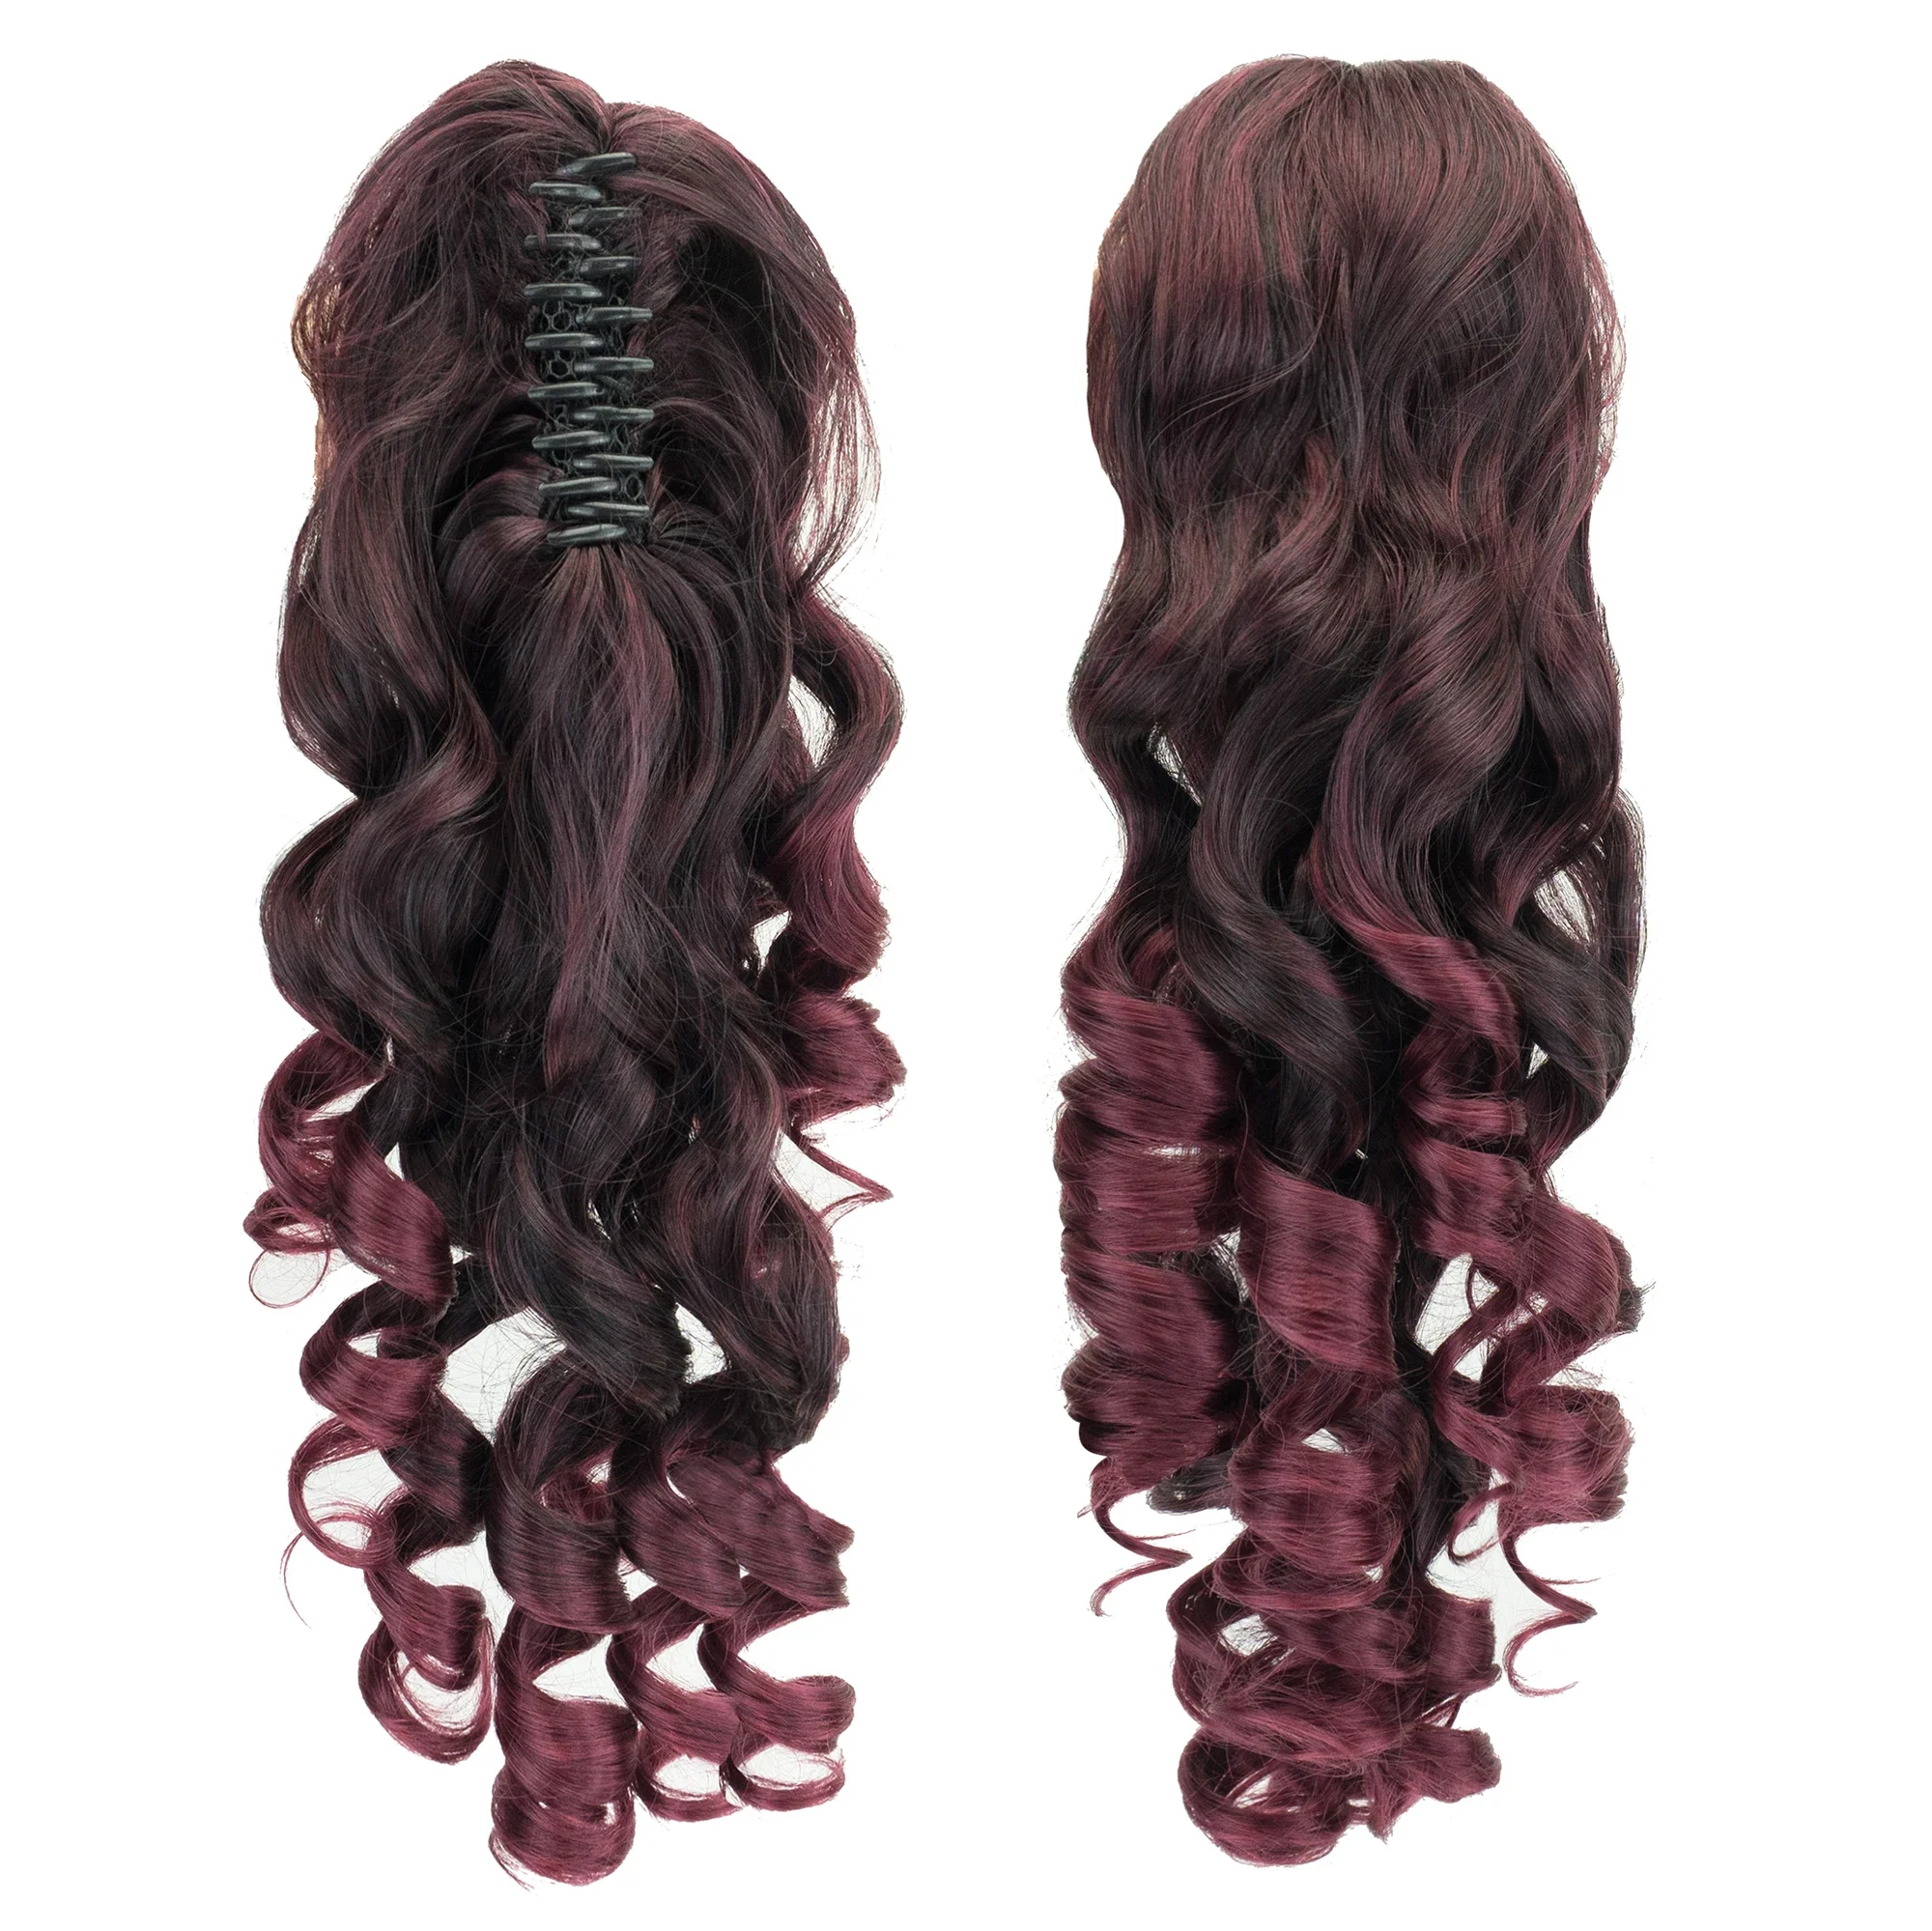 

Burgundy Curly Clip in Ponytails Hairpieces Claw Headwear Fake Pony Tail Hair Extensions Postiche Afro Puff